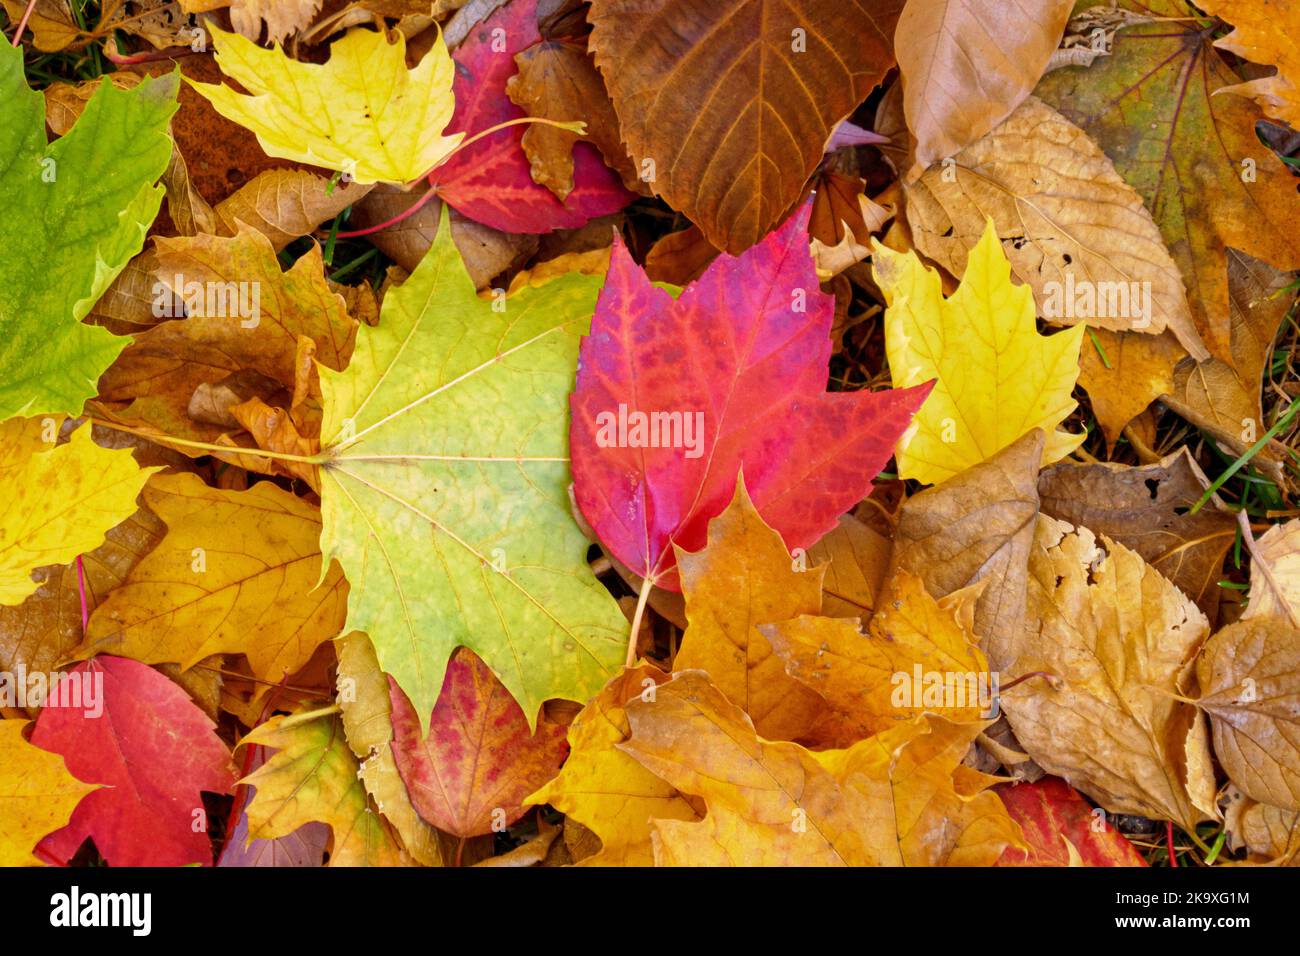 Colorful autumn leaves on ground, including leaves of the Norway and red maples. Stock Photo